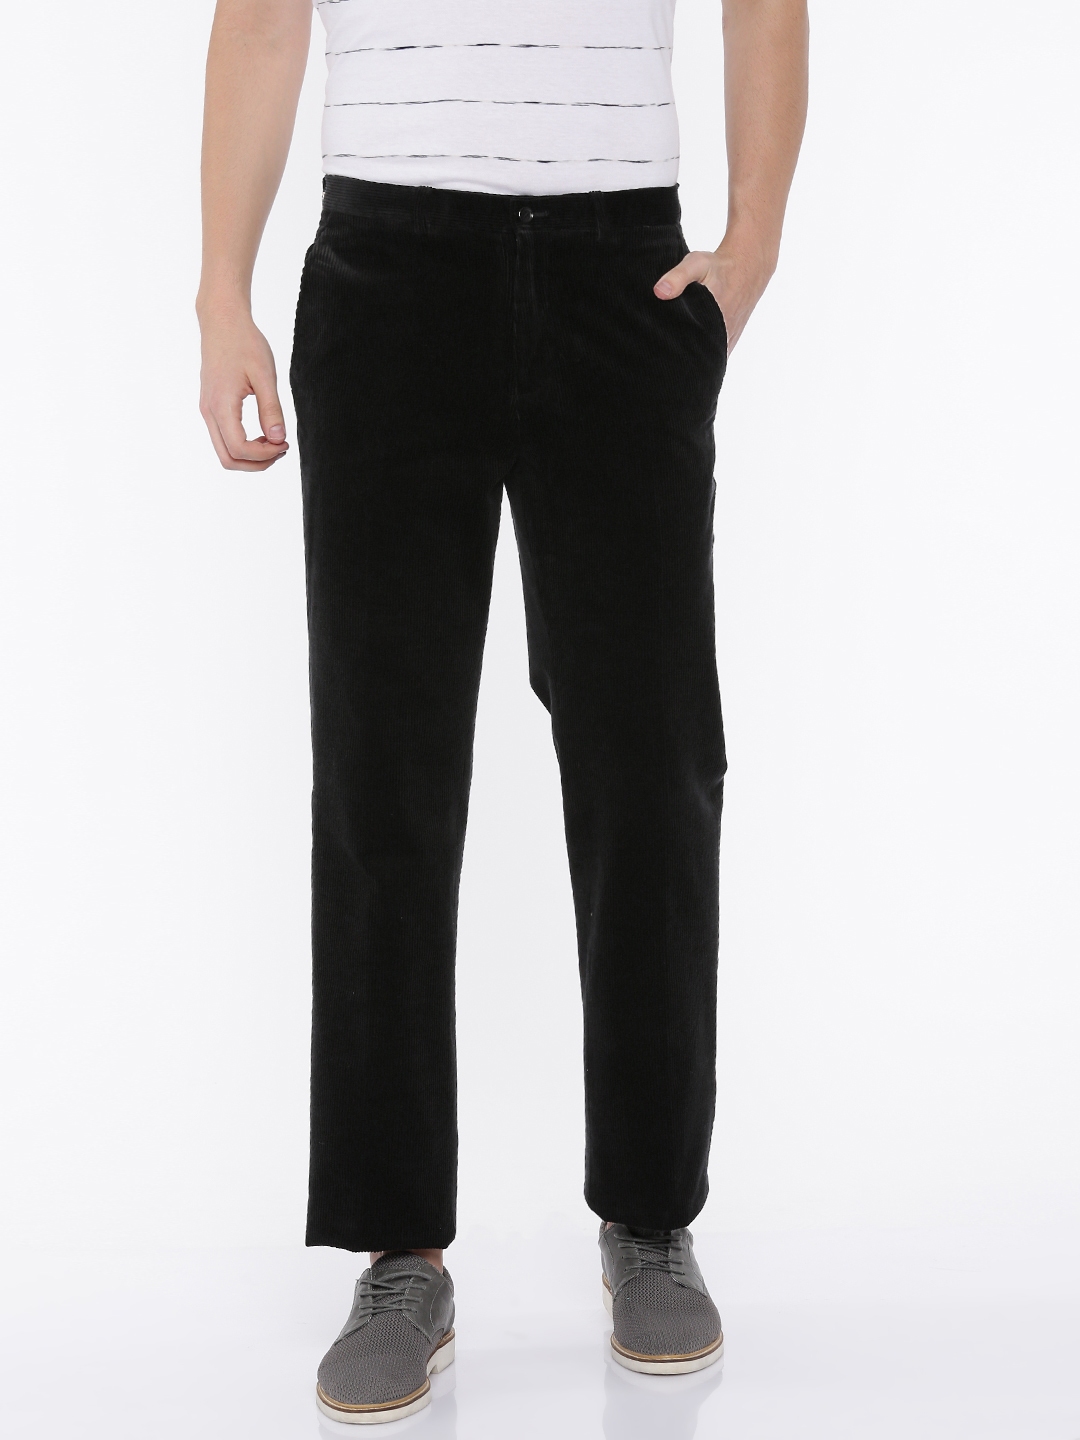 Mens Country Cord Trousers Flat Front Black Corduroy Trousers Alexanders  of London